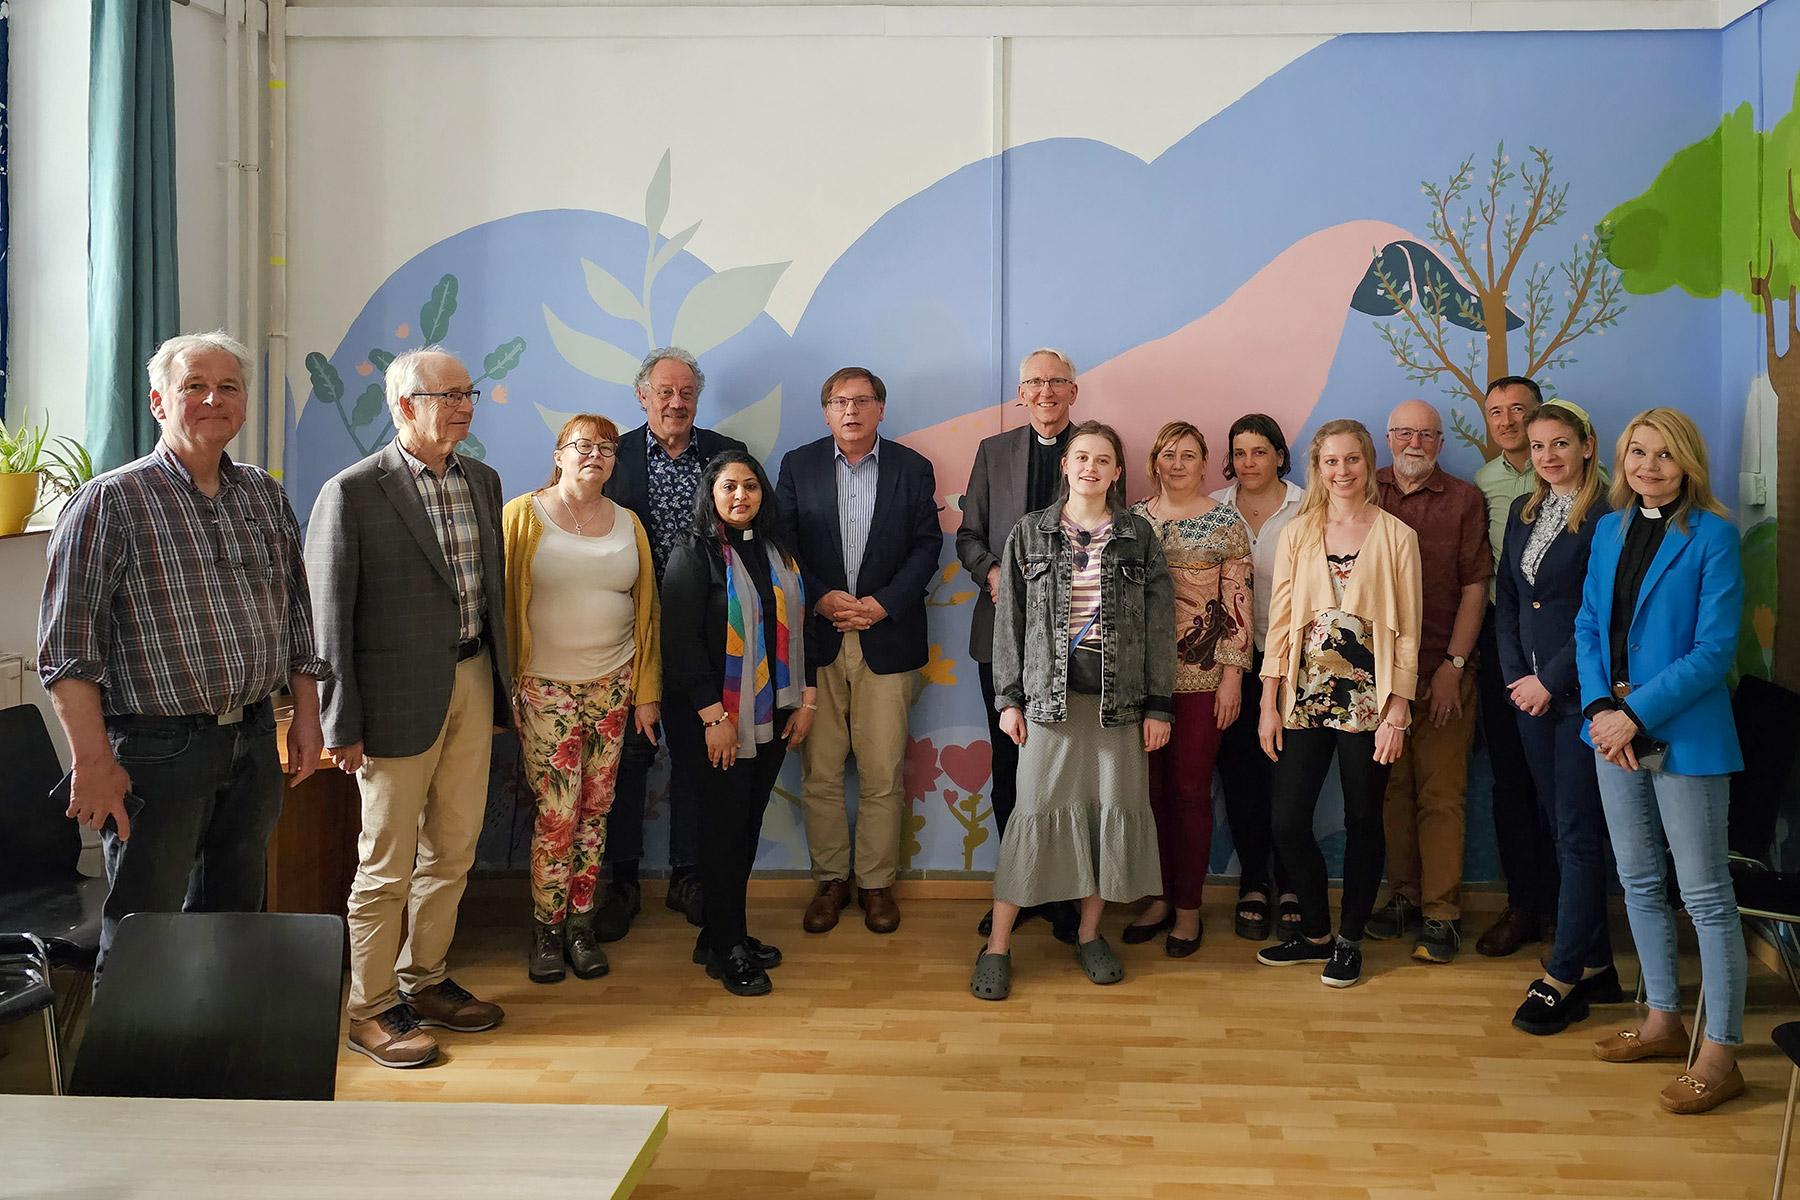 Members of the LWF European Diaconal Process working group, when they visited the Dévai Fogadó community center in Budapest. Photo: ELCH